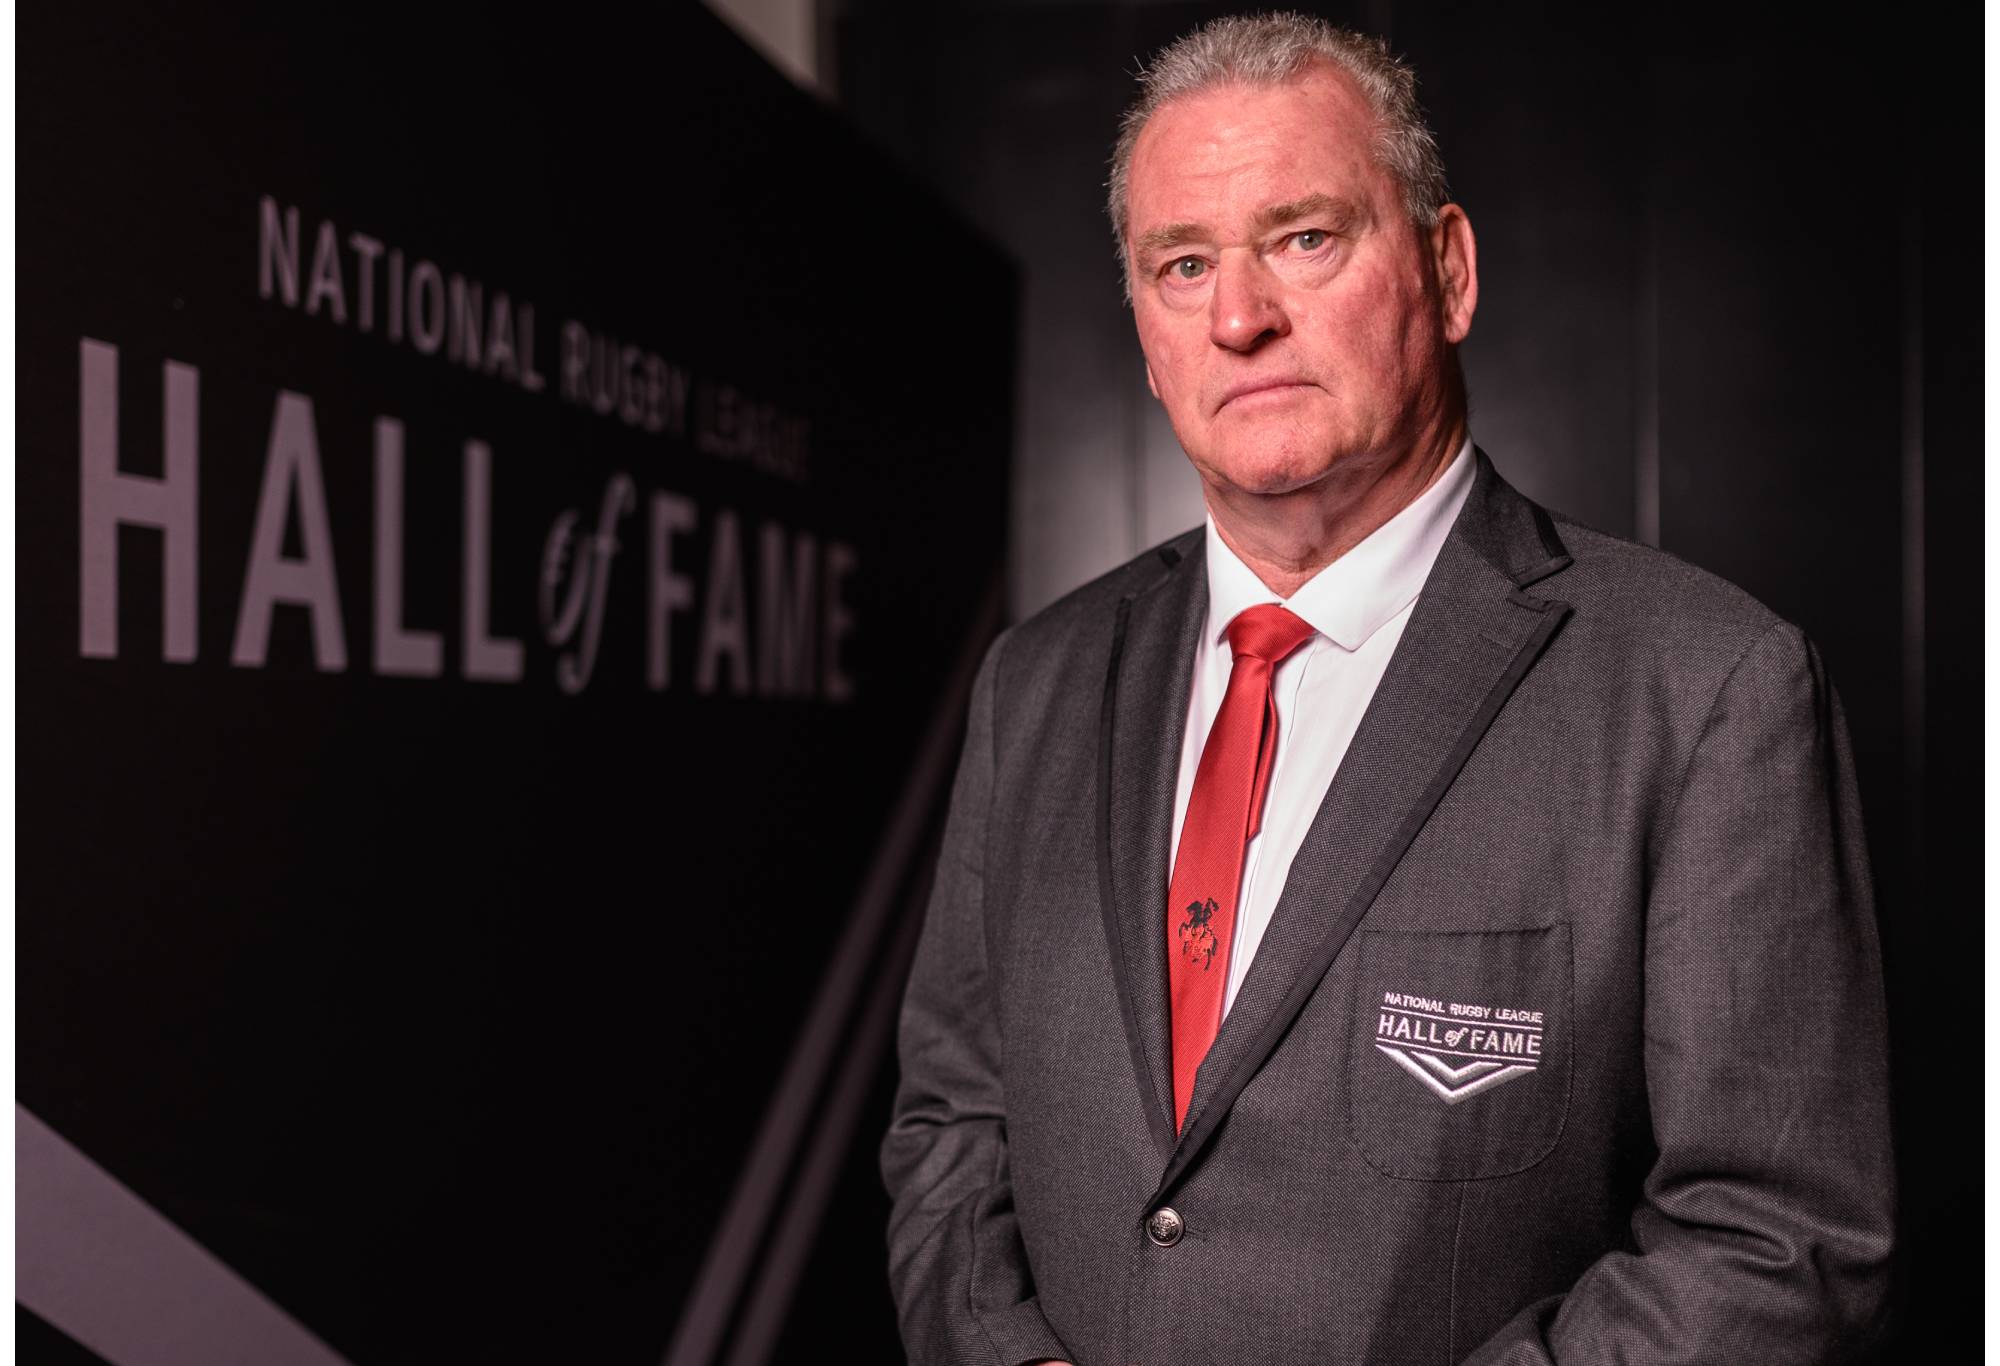 SYDNEY, AUSTRALIA - AUGUST 14: Craig Young poses for a portrait after being inducted into the 2019 NRL Hall of Fame at Carriageworks on August 14, 2019 in Sydney, Australia. (Photo by James Gourley/Getty Images)